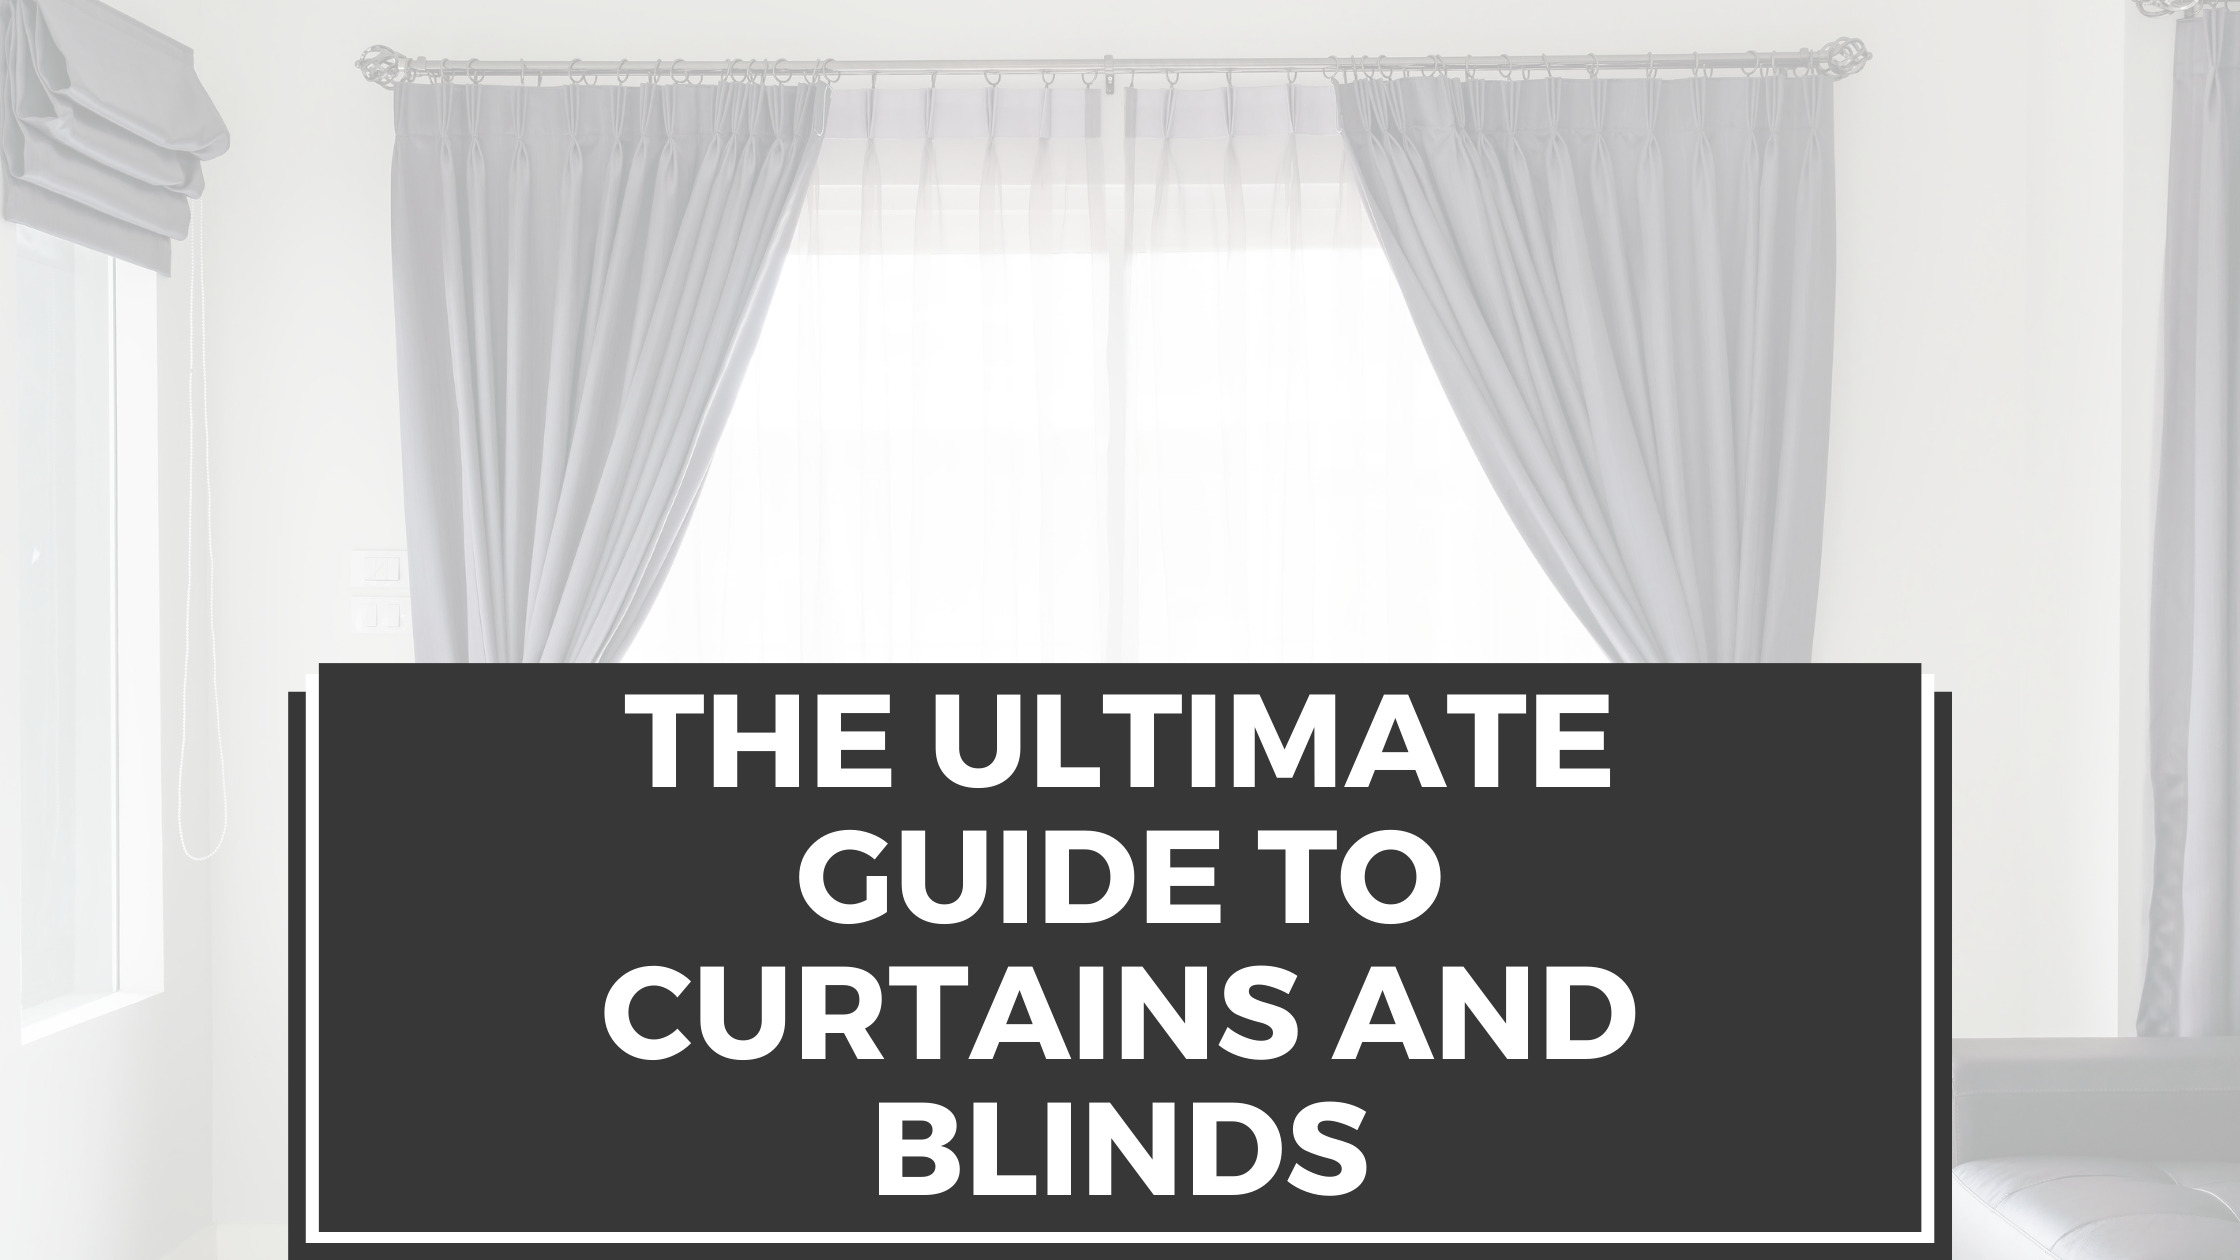 The Ultimate Guide to Curtains and Blinds